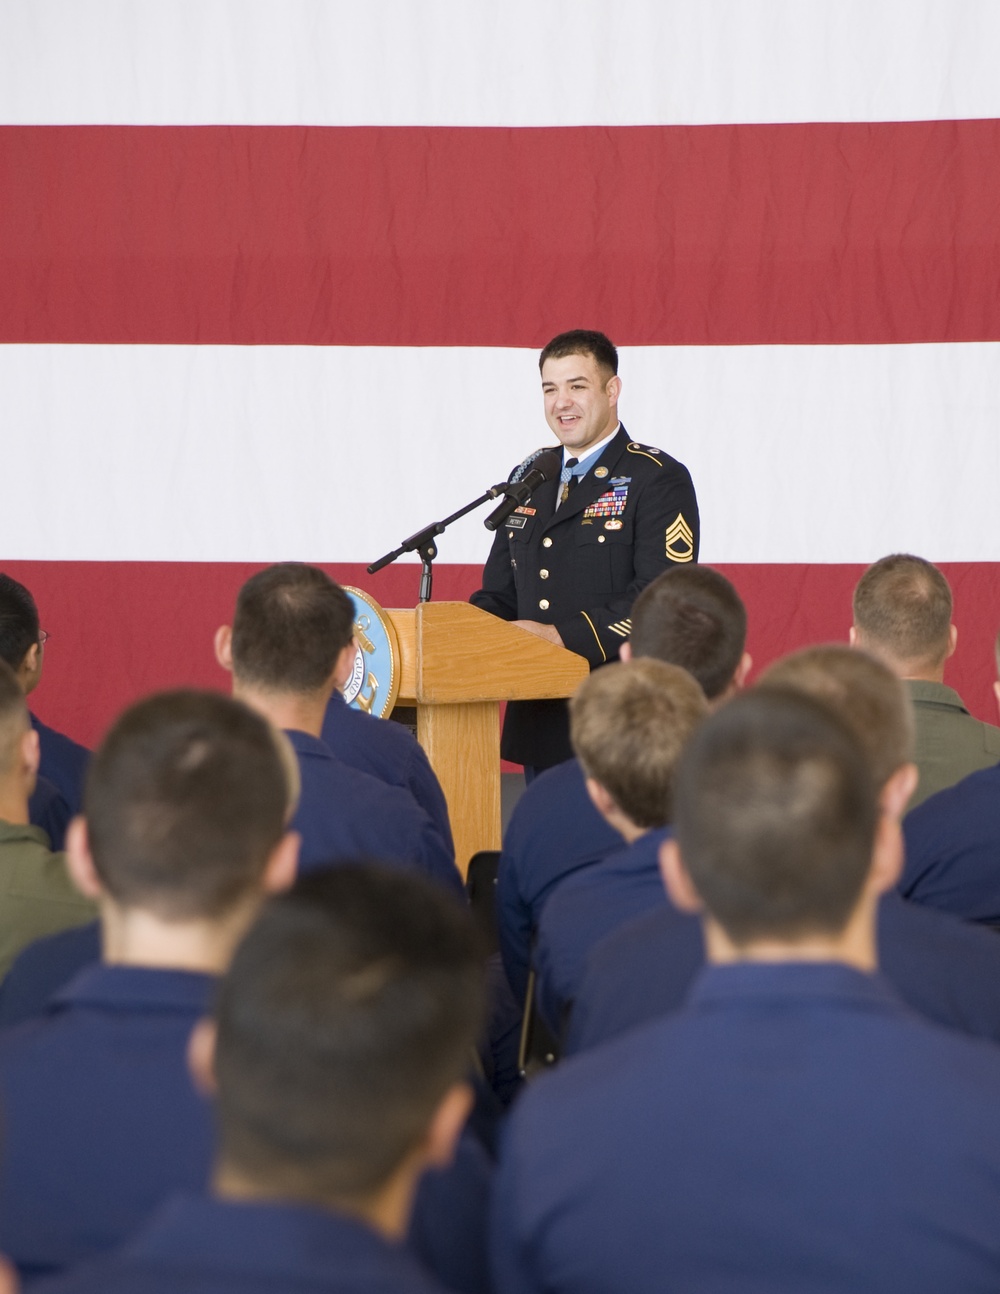 Afghanistan Medal of Honor Recipient visits Air Station San Diego